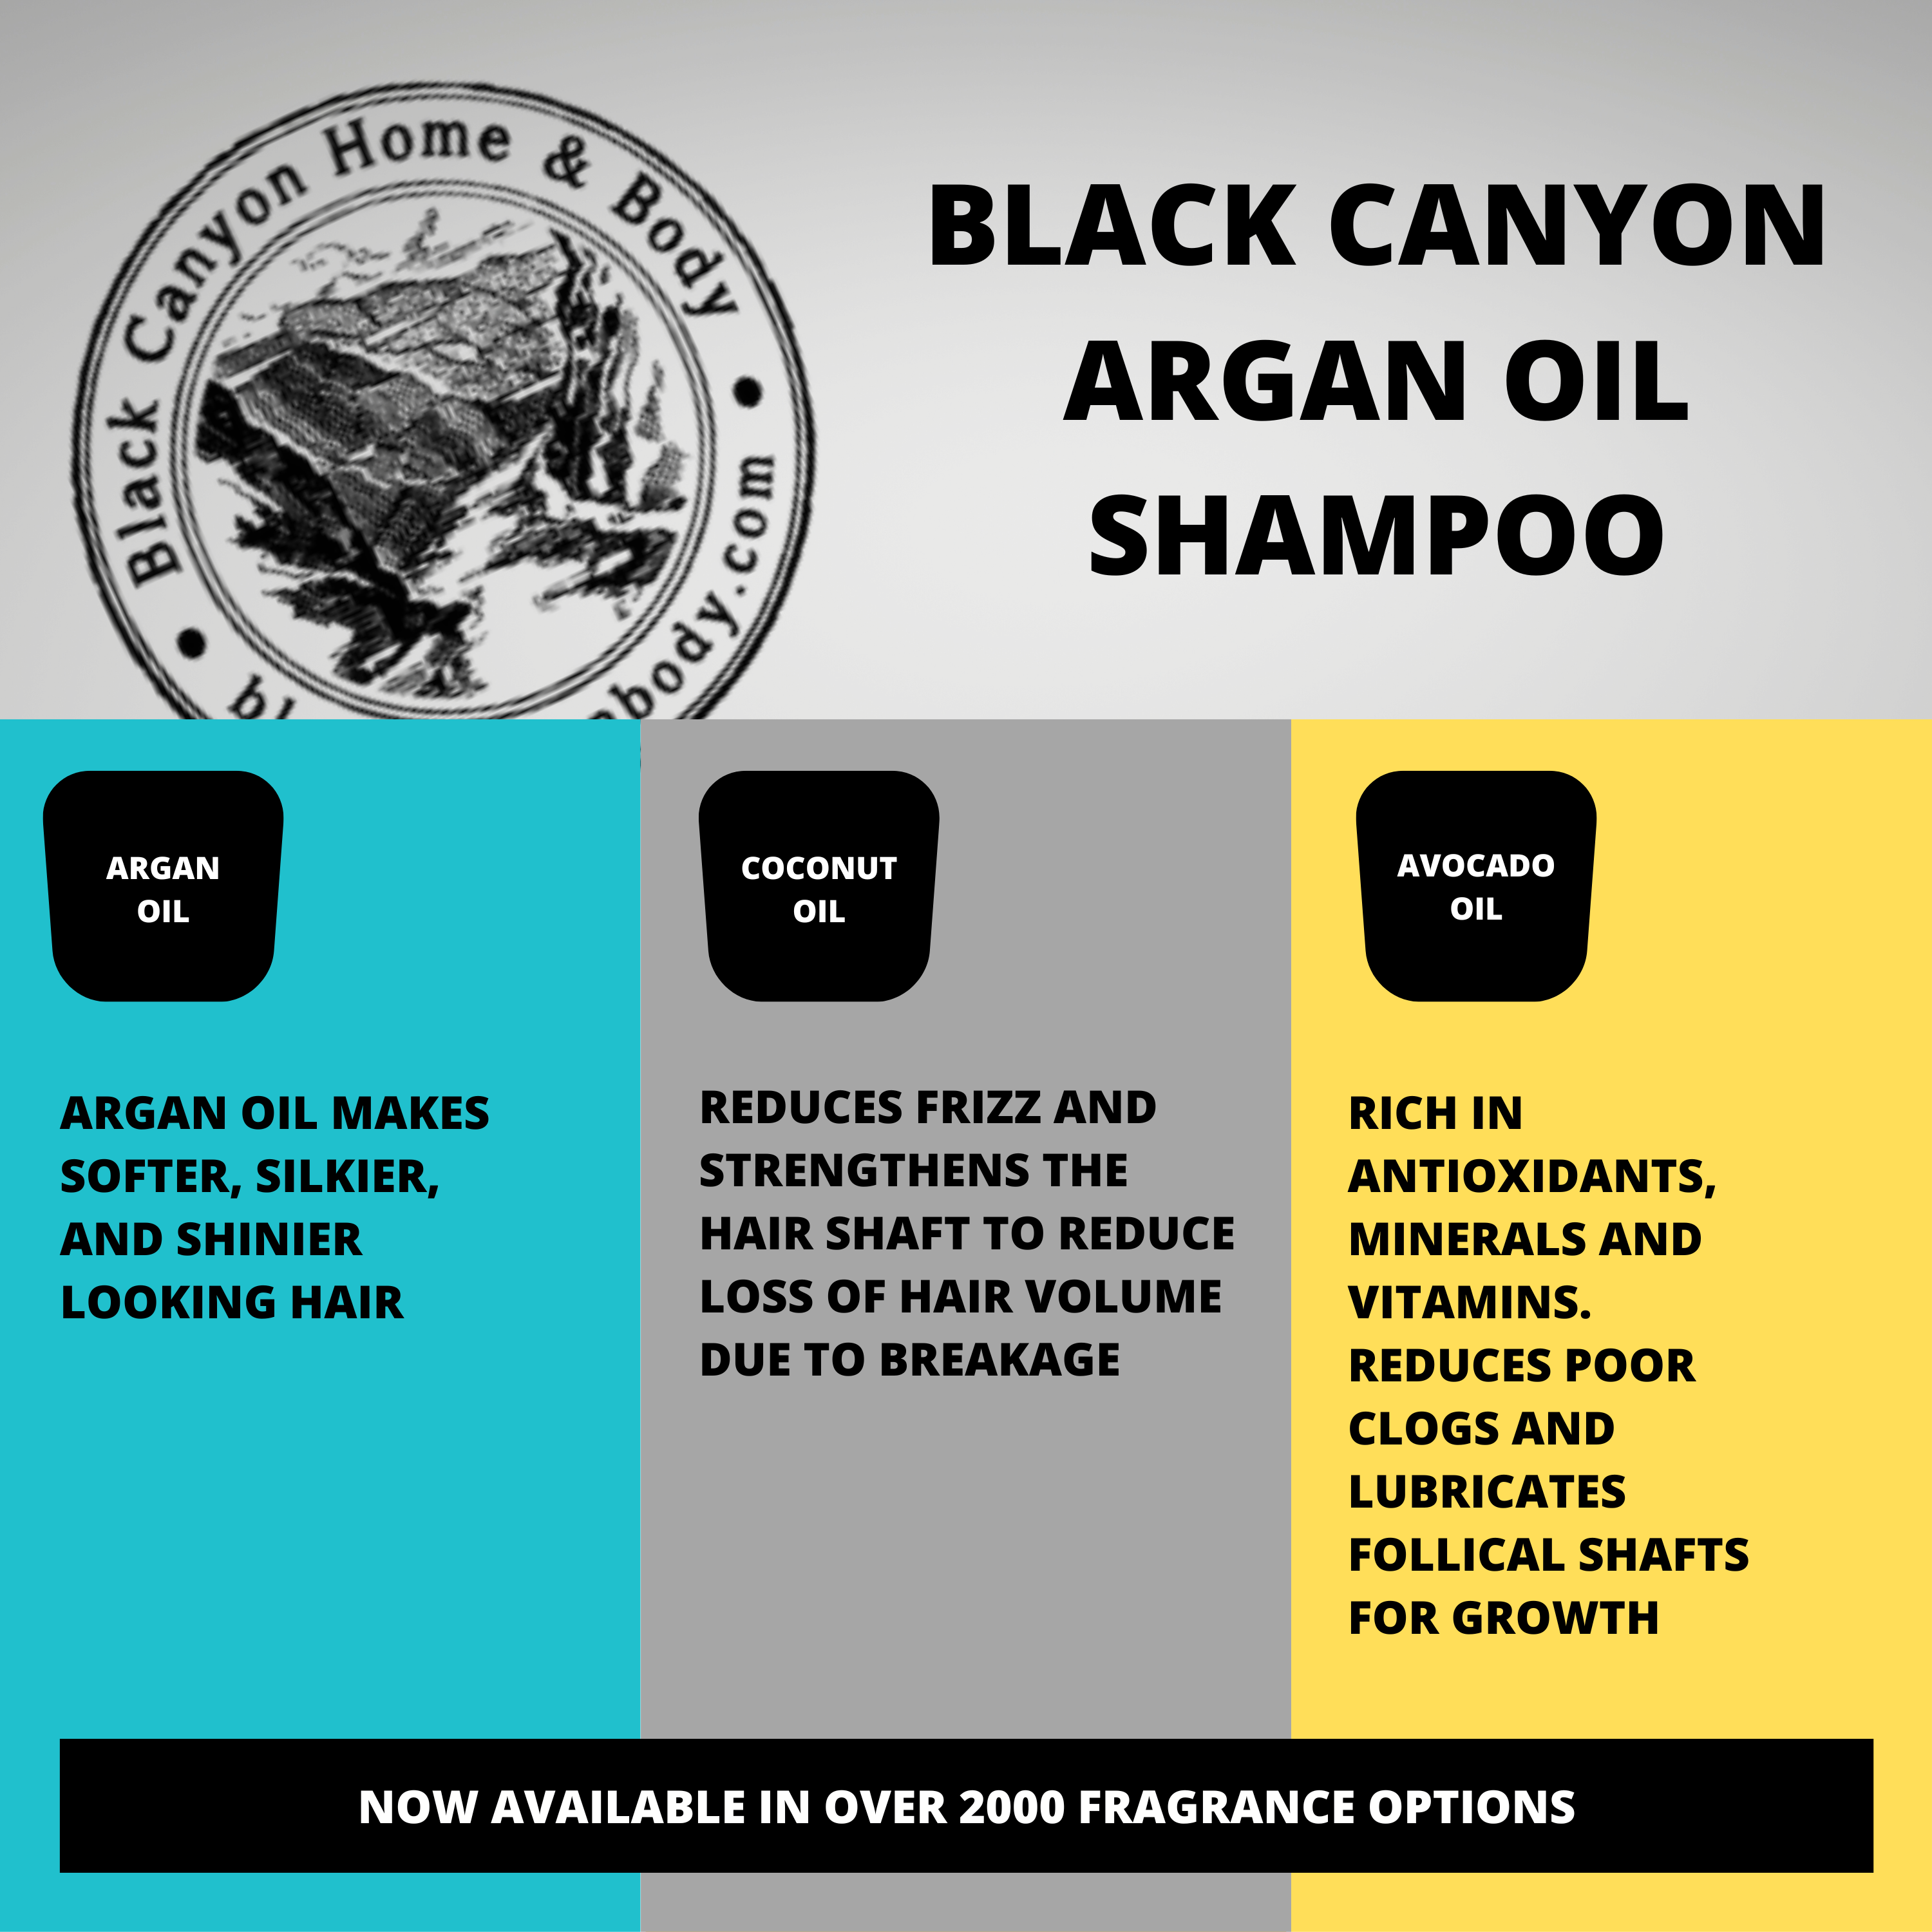 Black Canyon Black Currant & Cognac Scented Shampoo with Argan Oil